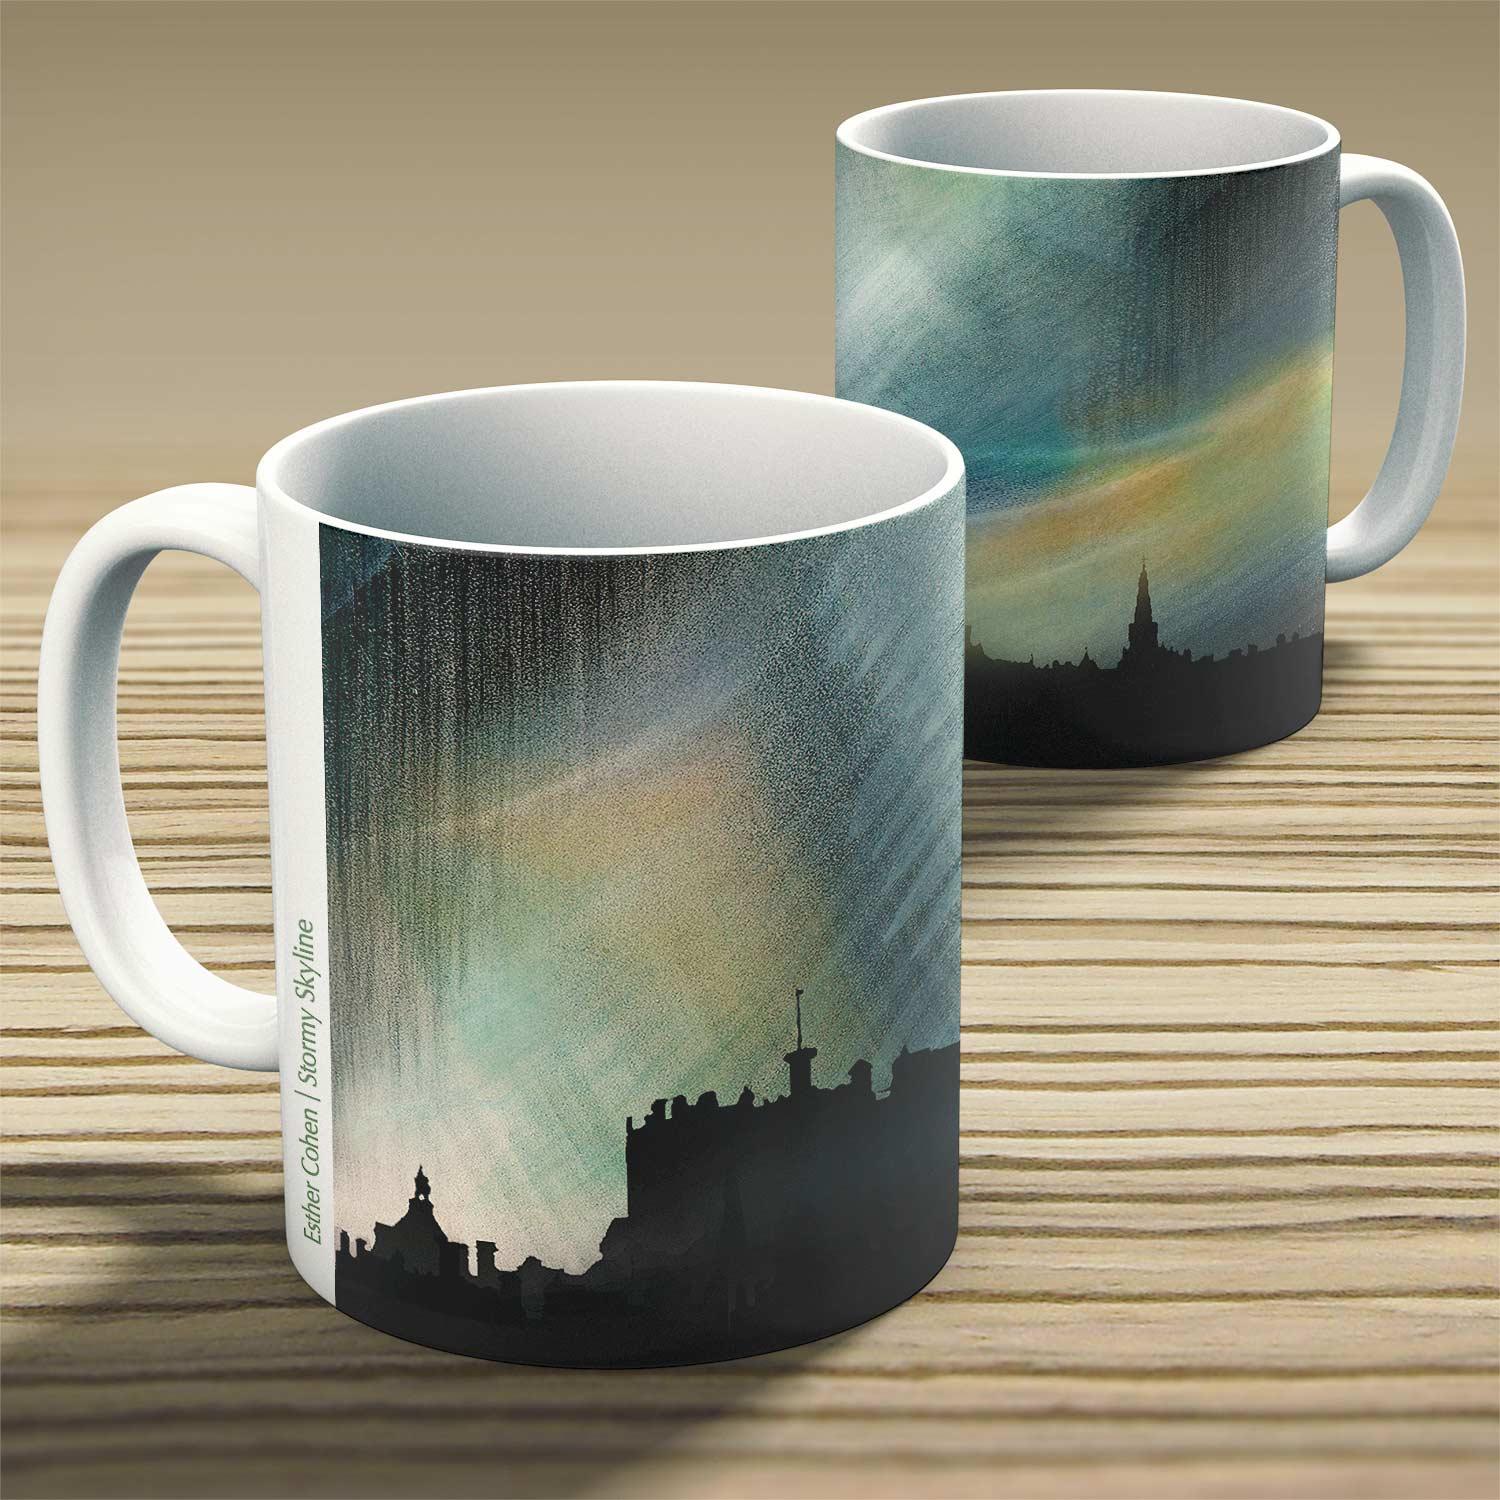 Stormy Skyline Mug from an original painting by artist Esther Cohen